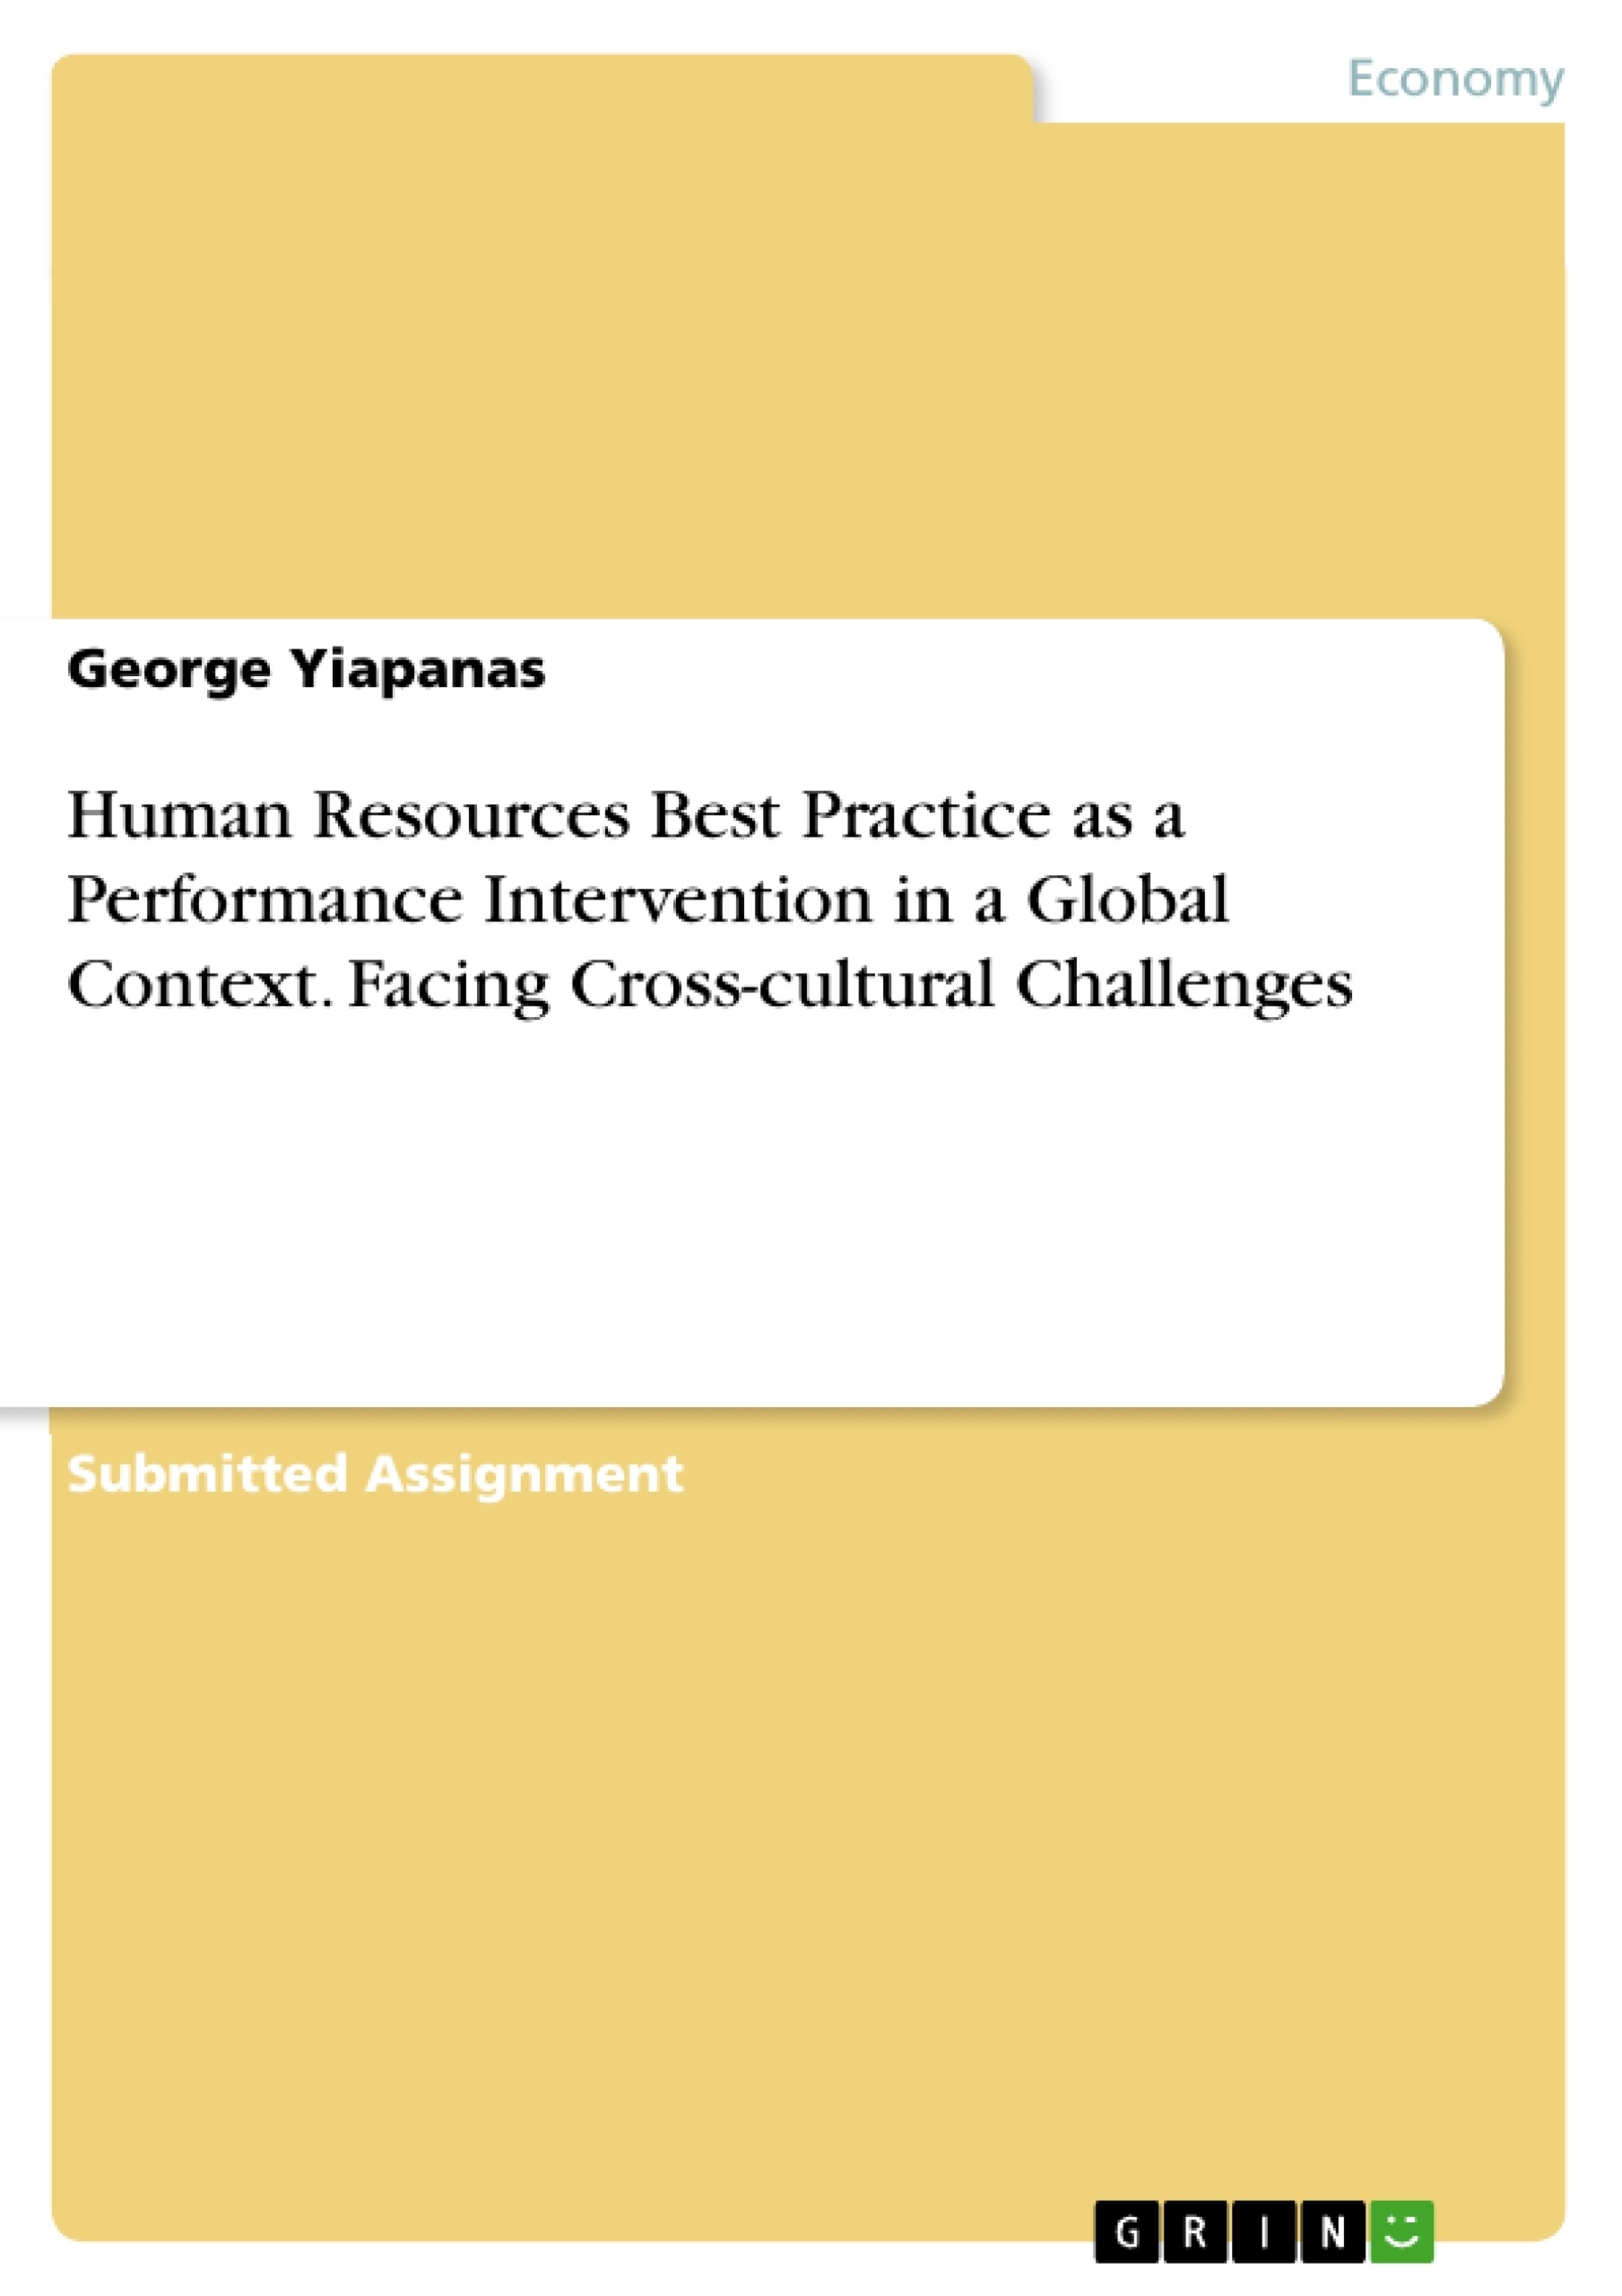 Titre: Human Resources Best Practice as a Performance Intervention in a Global Context. Facing Cross-cultural Challenges